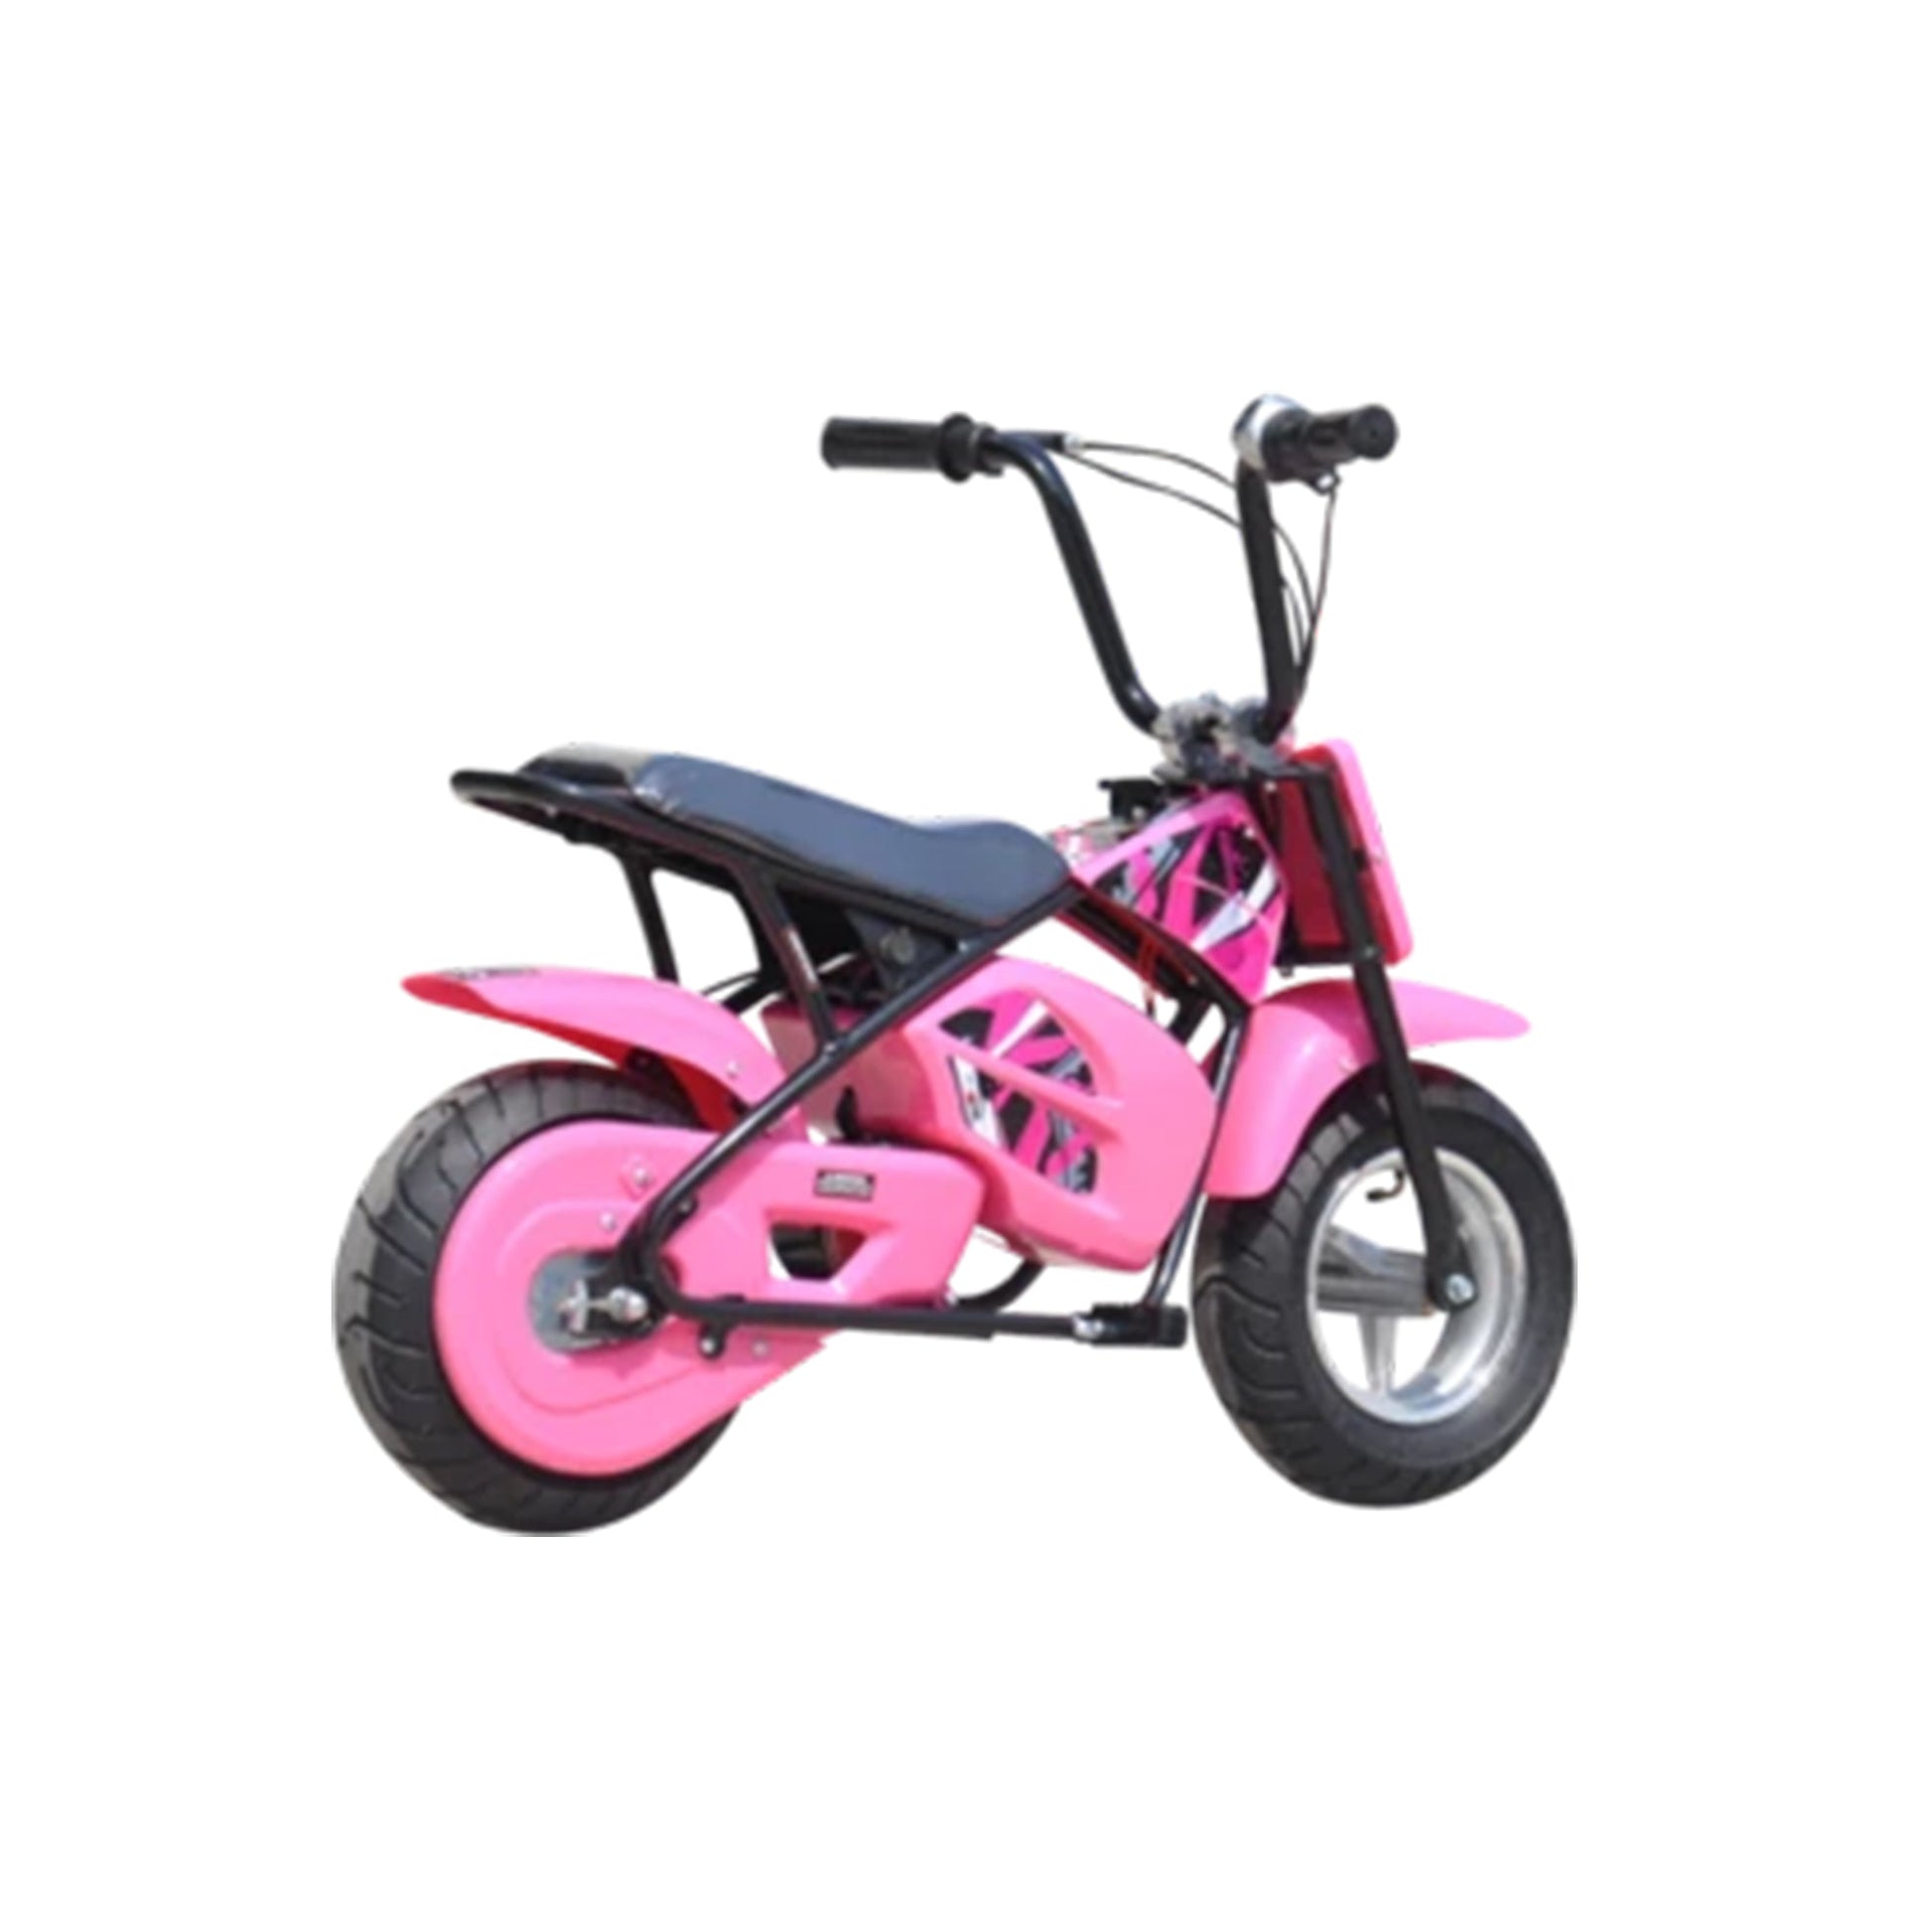 "Small pink mini Dirtbike Scrambler electric ride on for kids with stabilisers, 250 Watt 12 Volt, isolated on white background"